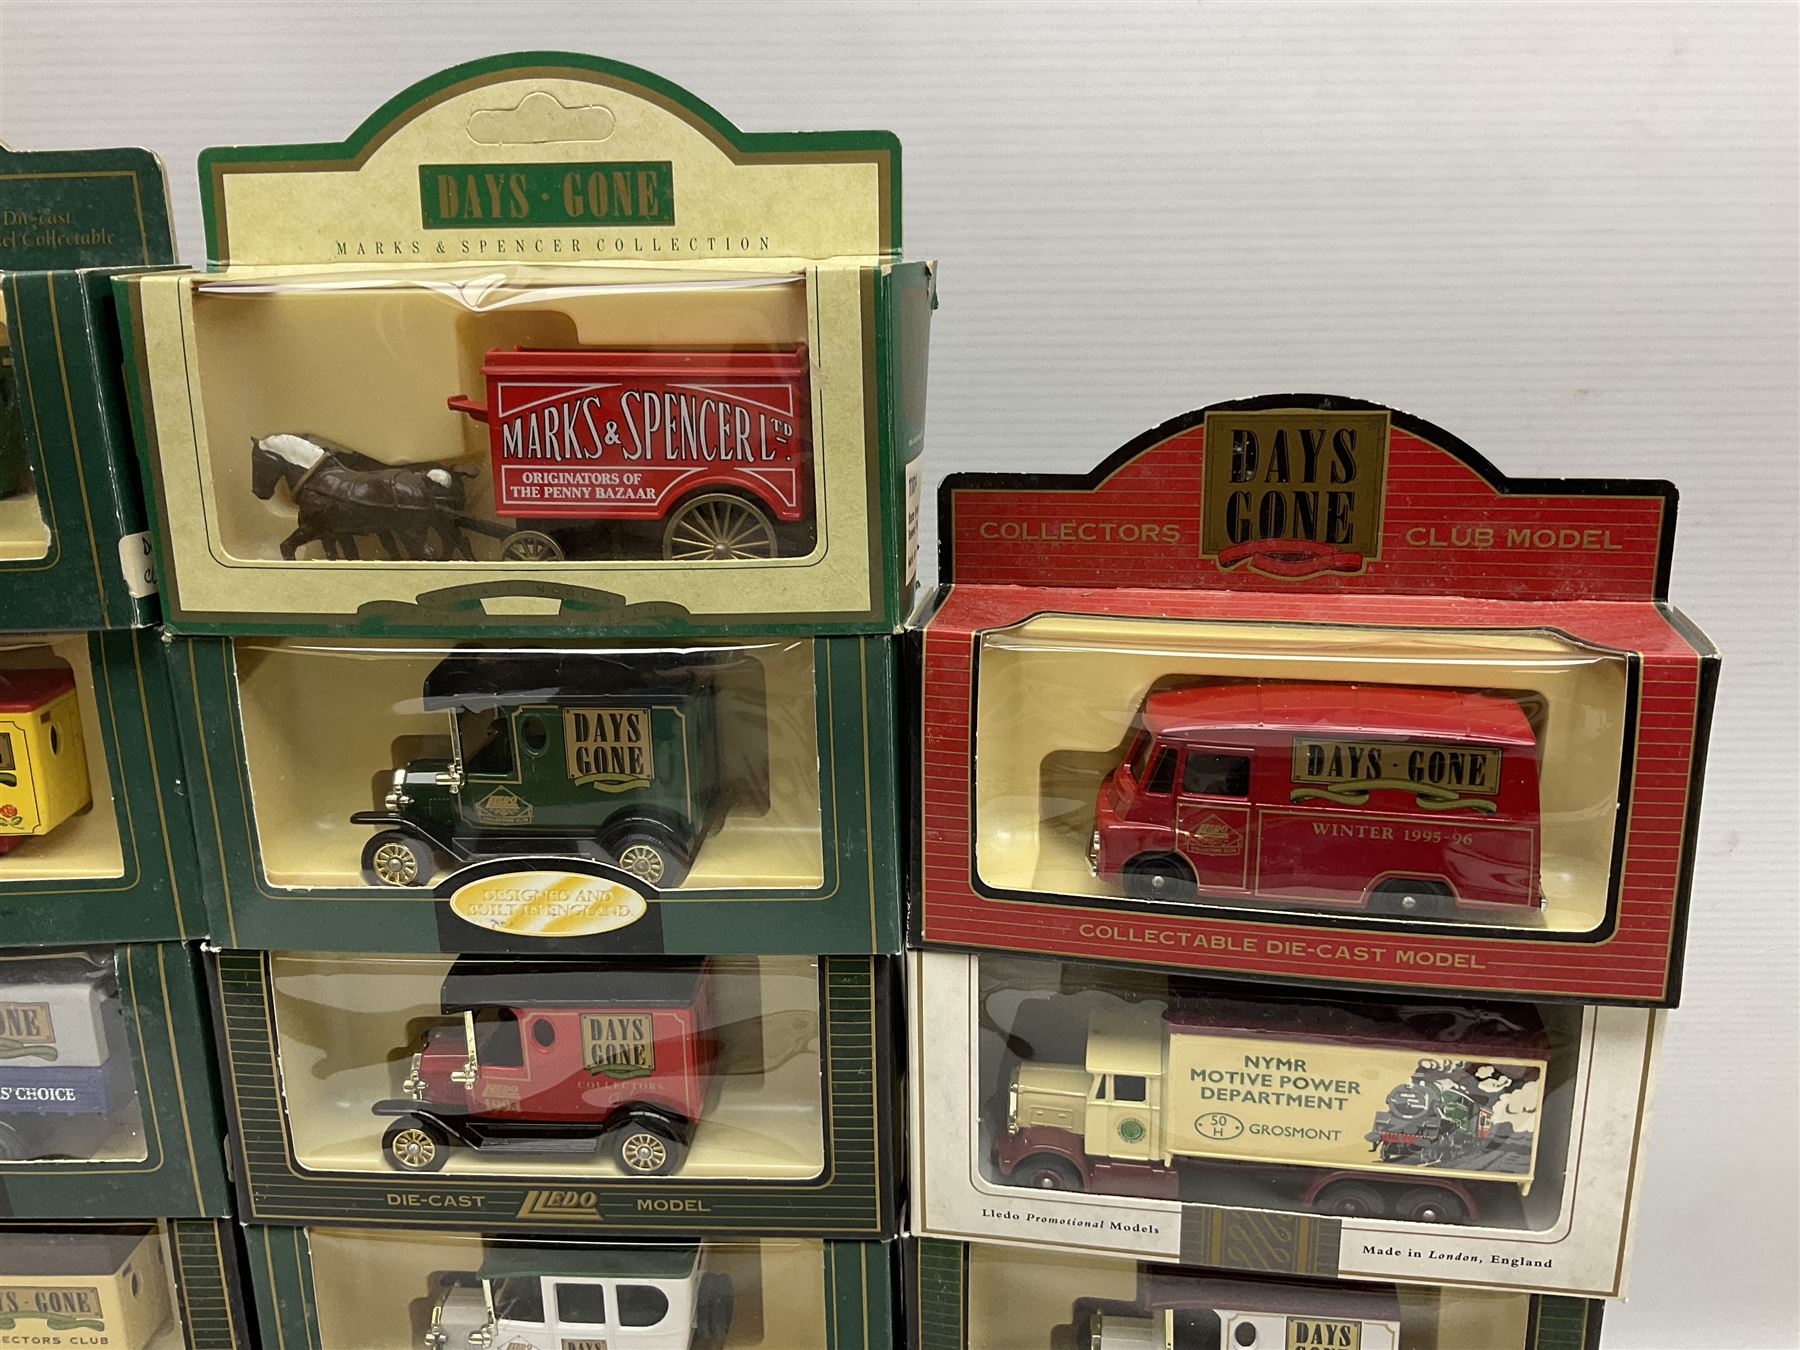 Collection of Days Gone/ Lledo die-cast models including thirty Lledo Promotional Models - Image 16 of 17